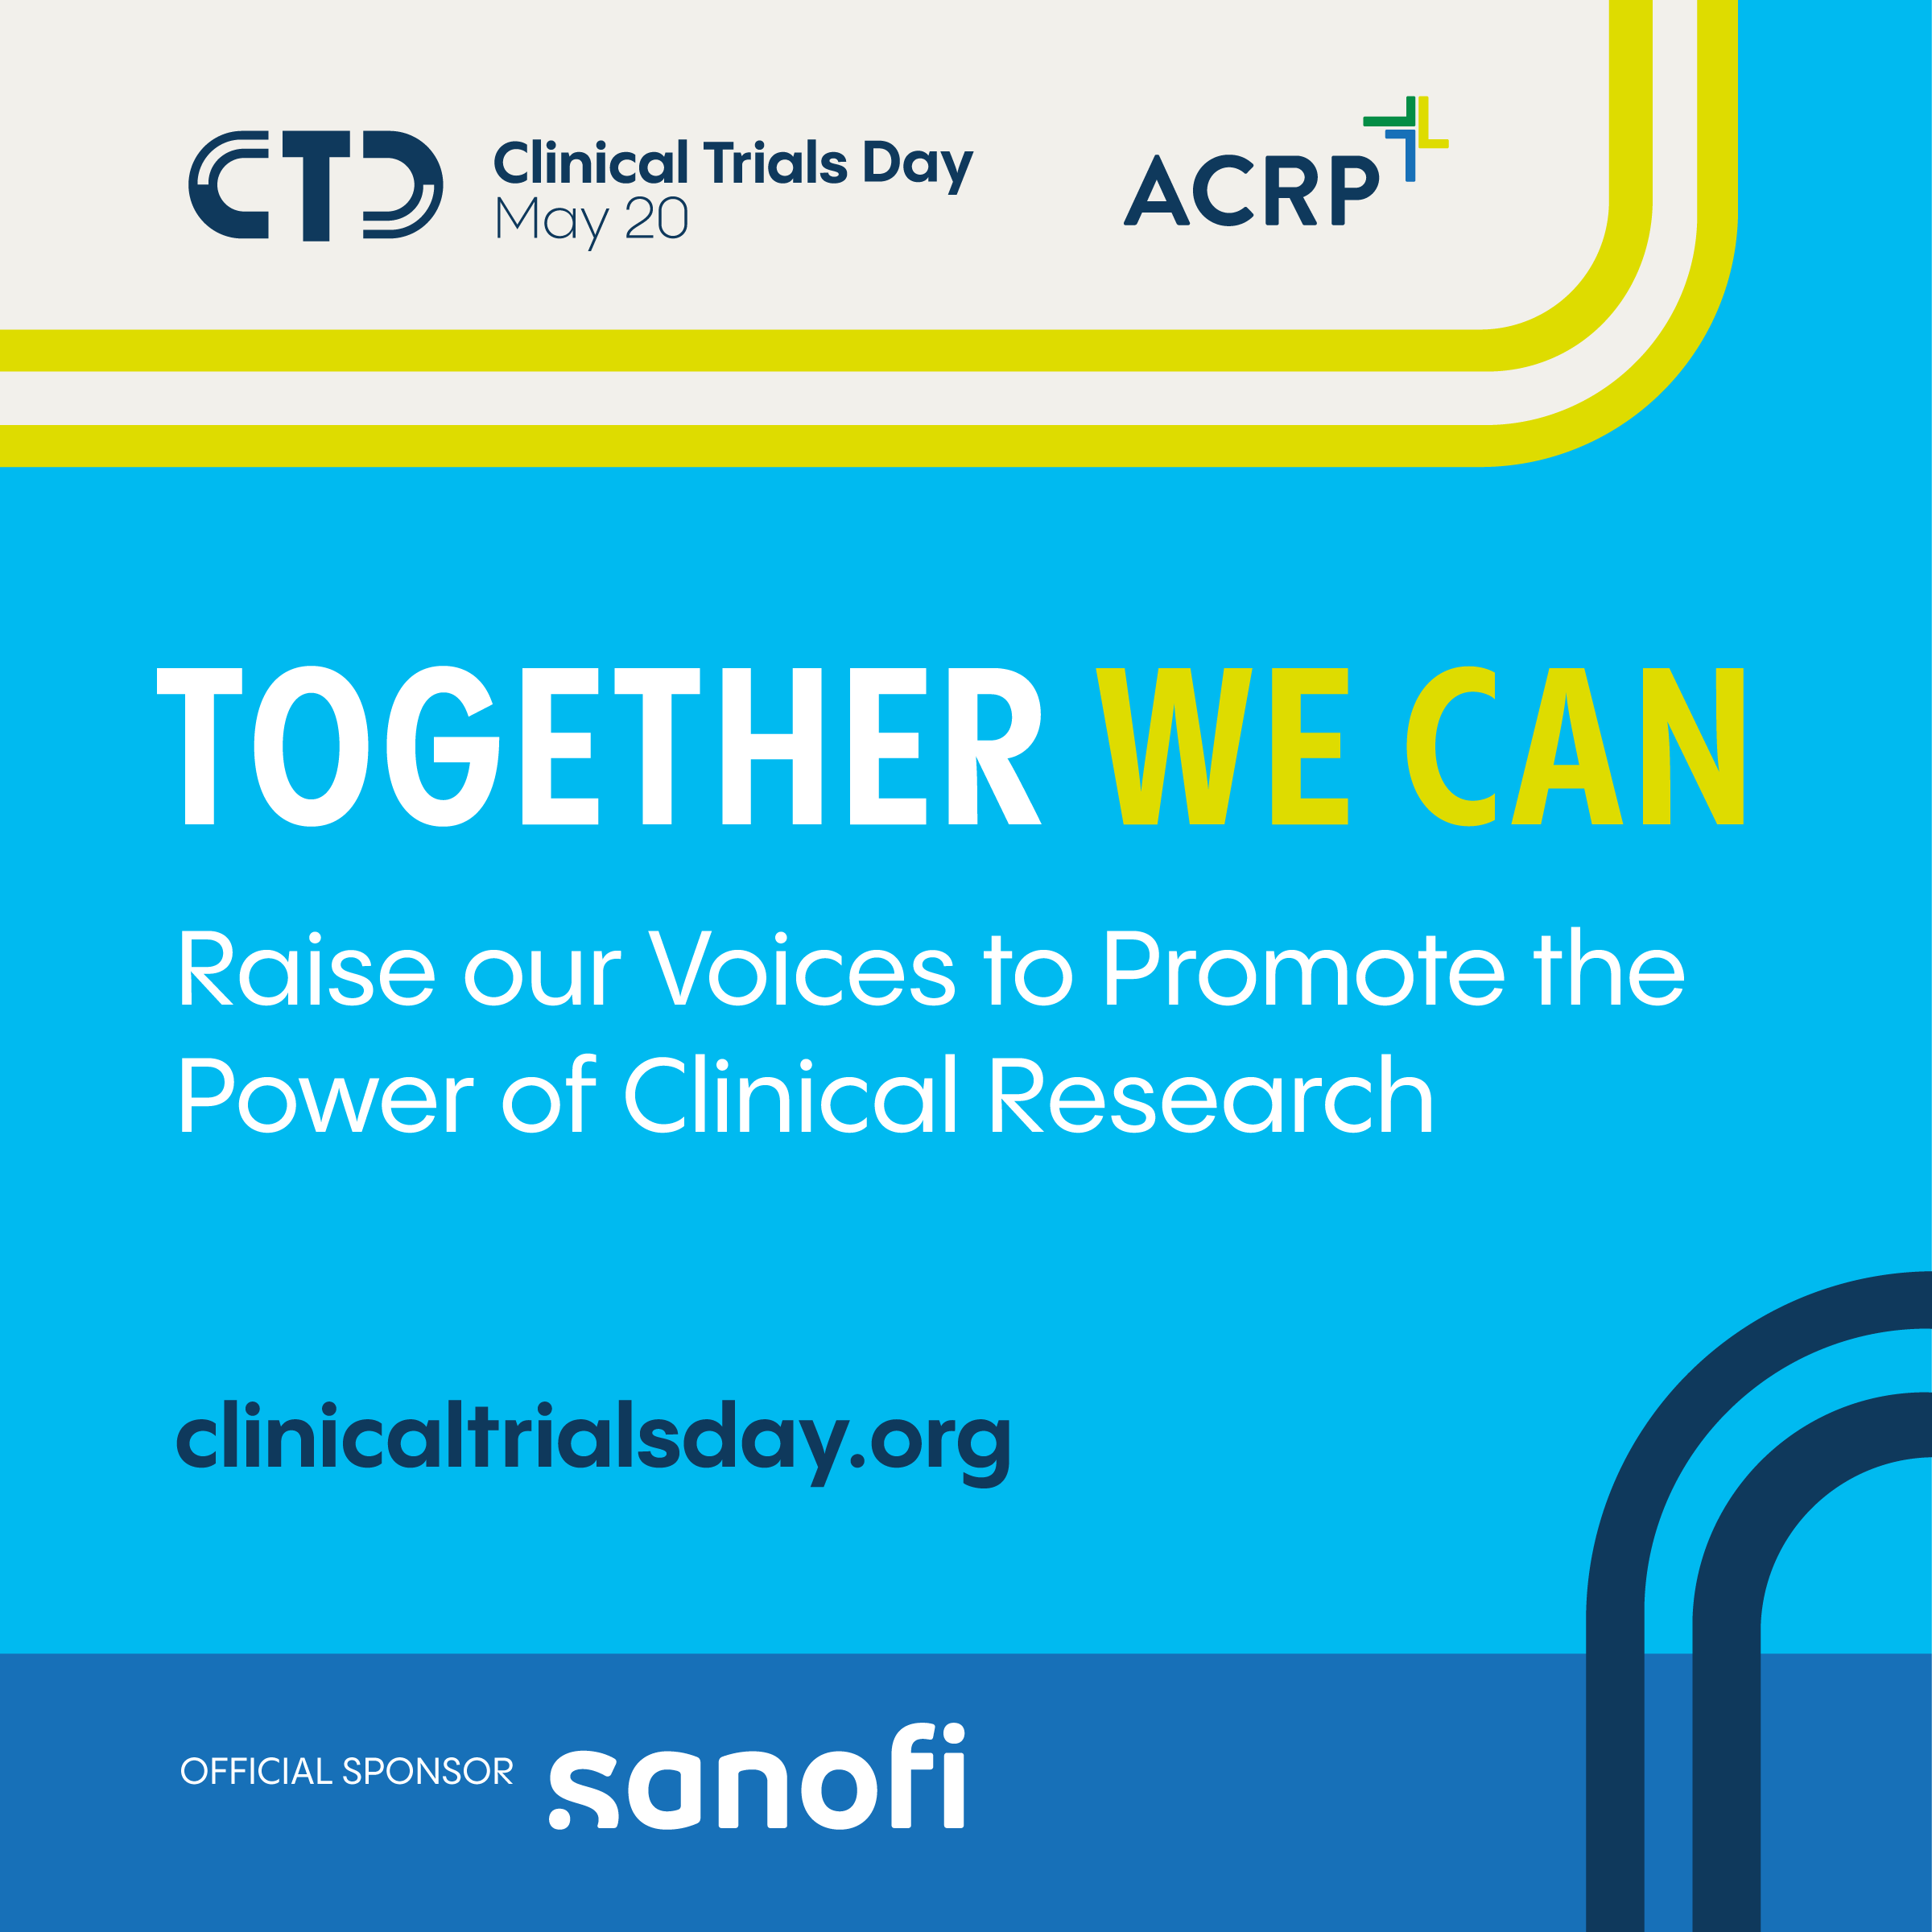 May 20, Clinical Trials Day Celebration